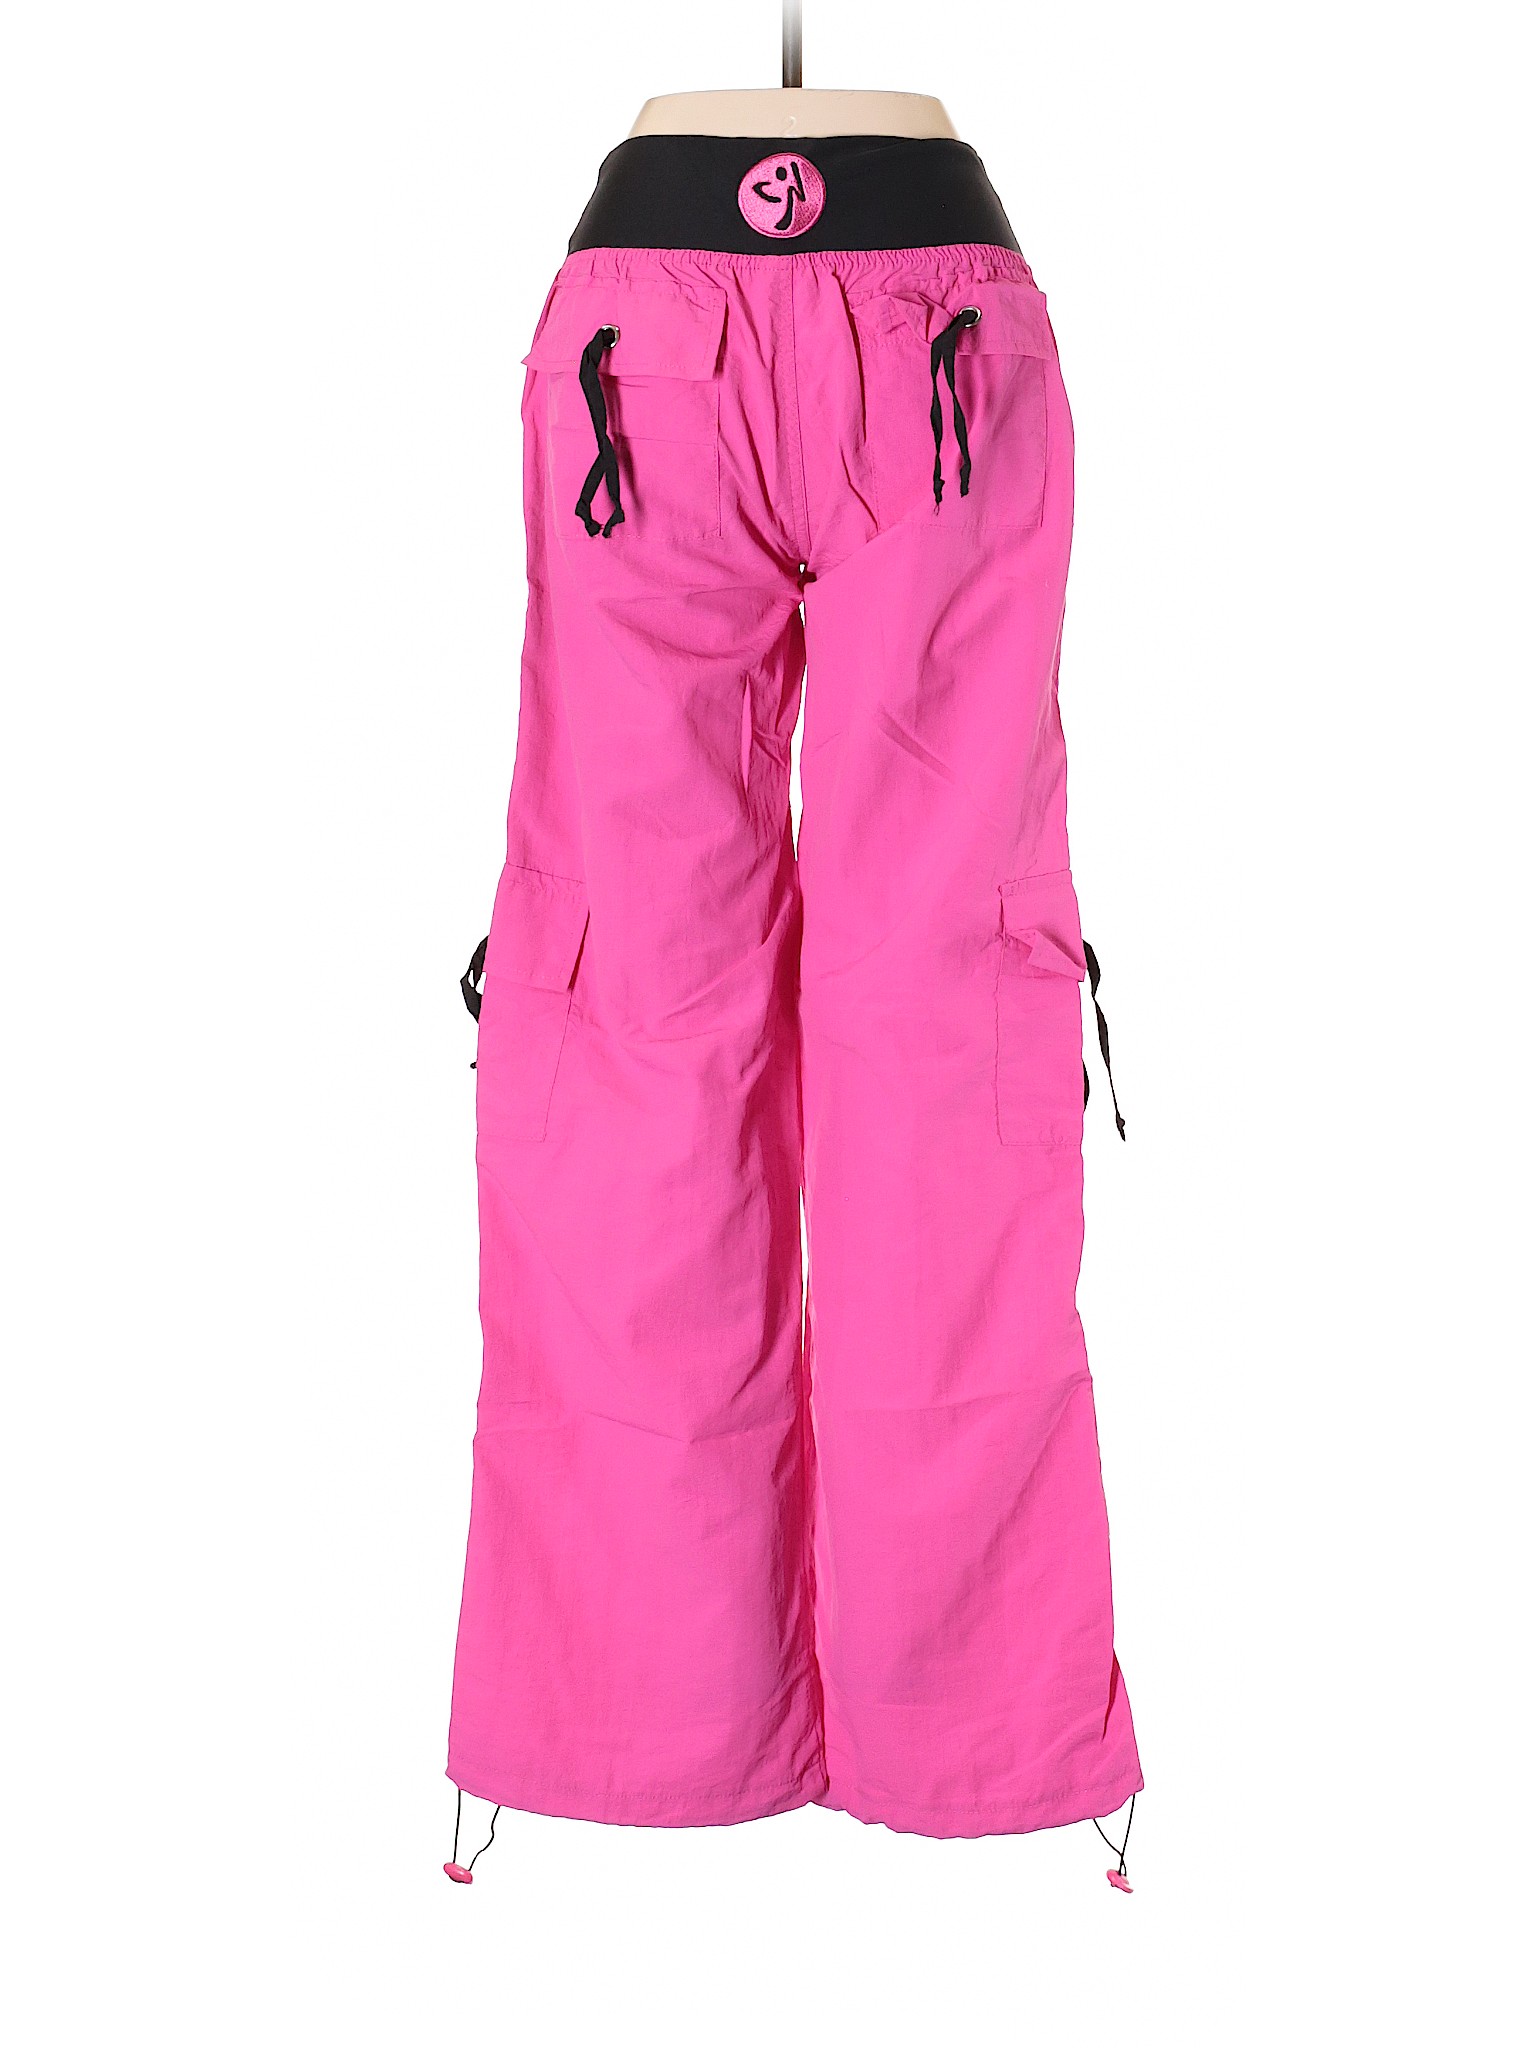 Zumba Wear Solid Pink Cargo Pants Size S - 64% off